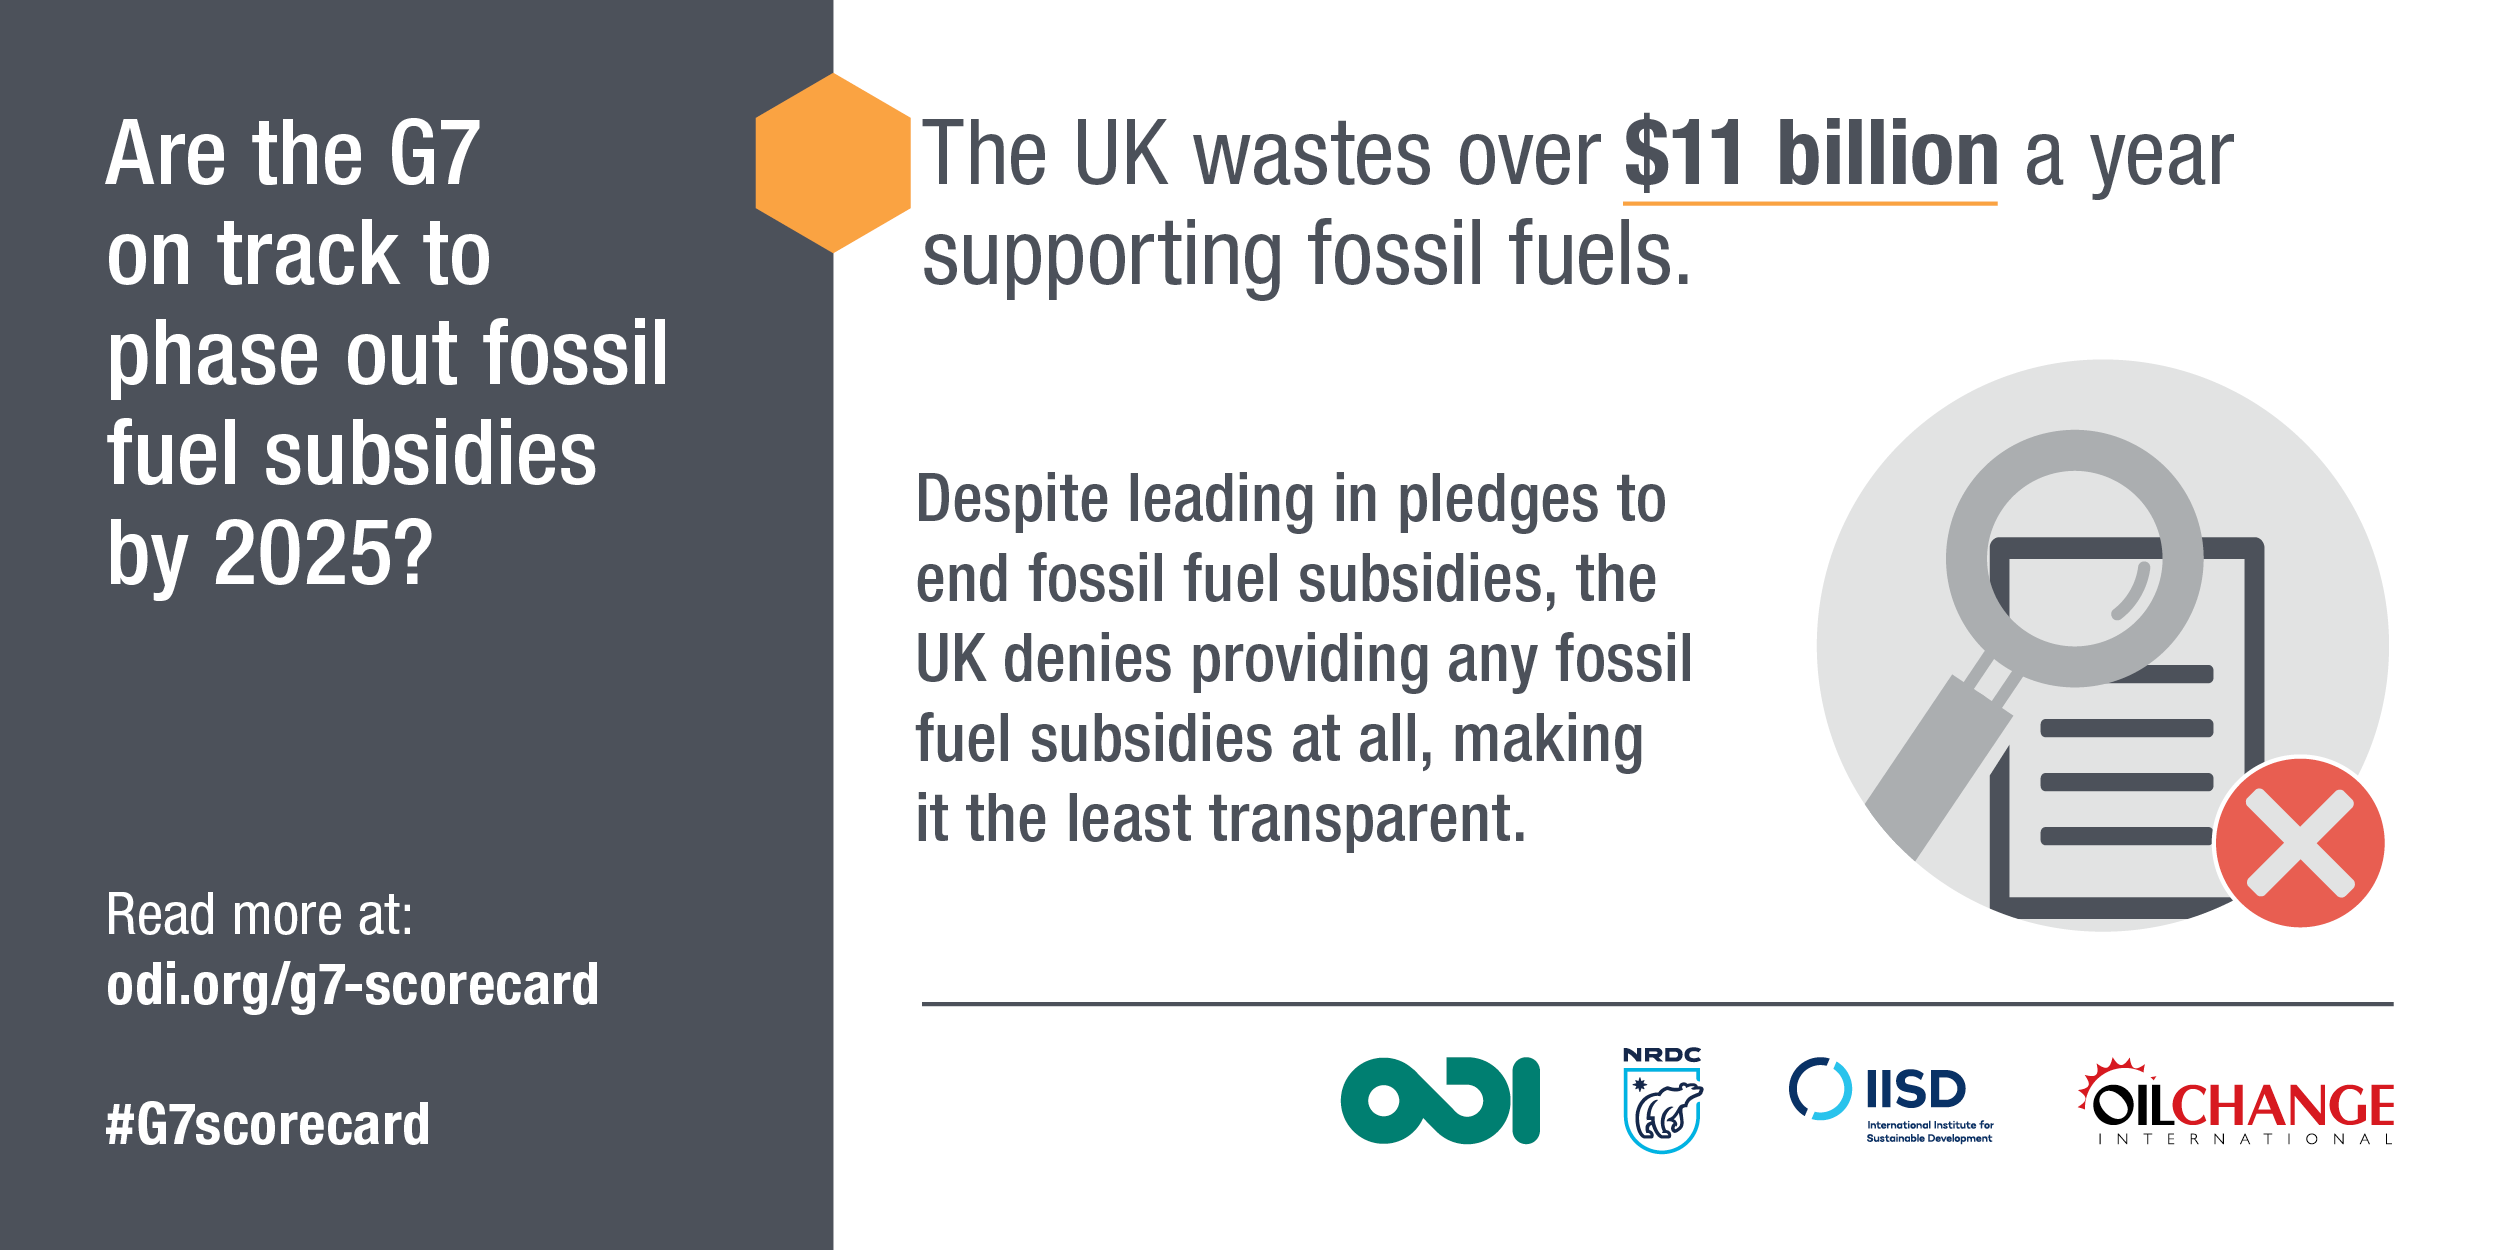 The UK wastes over $11 billion a year supporting fossil fuels. Image: ODI